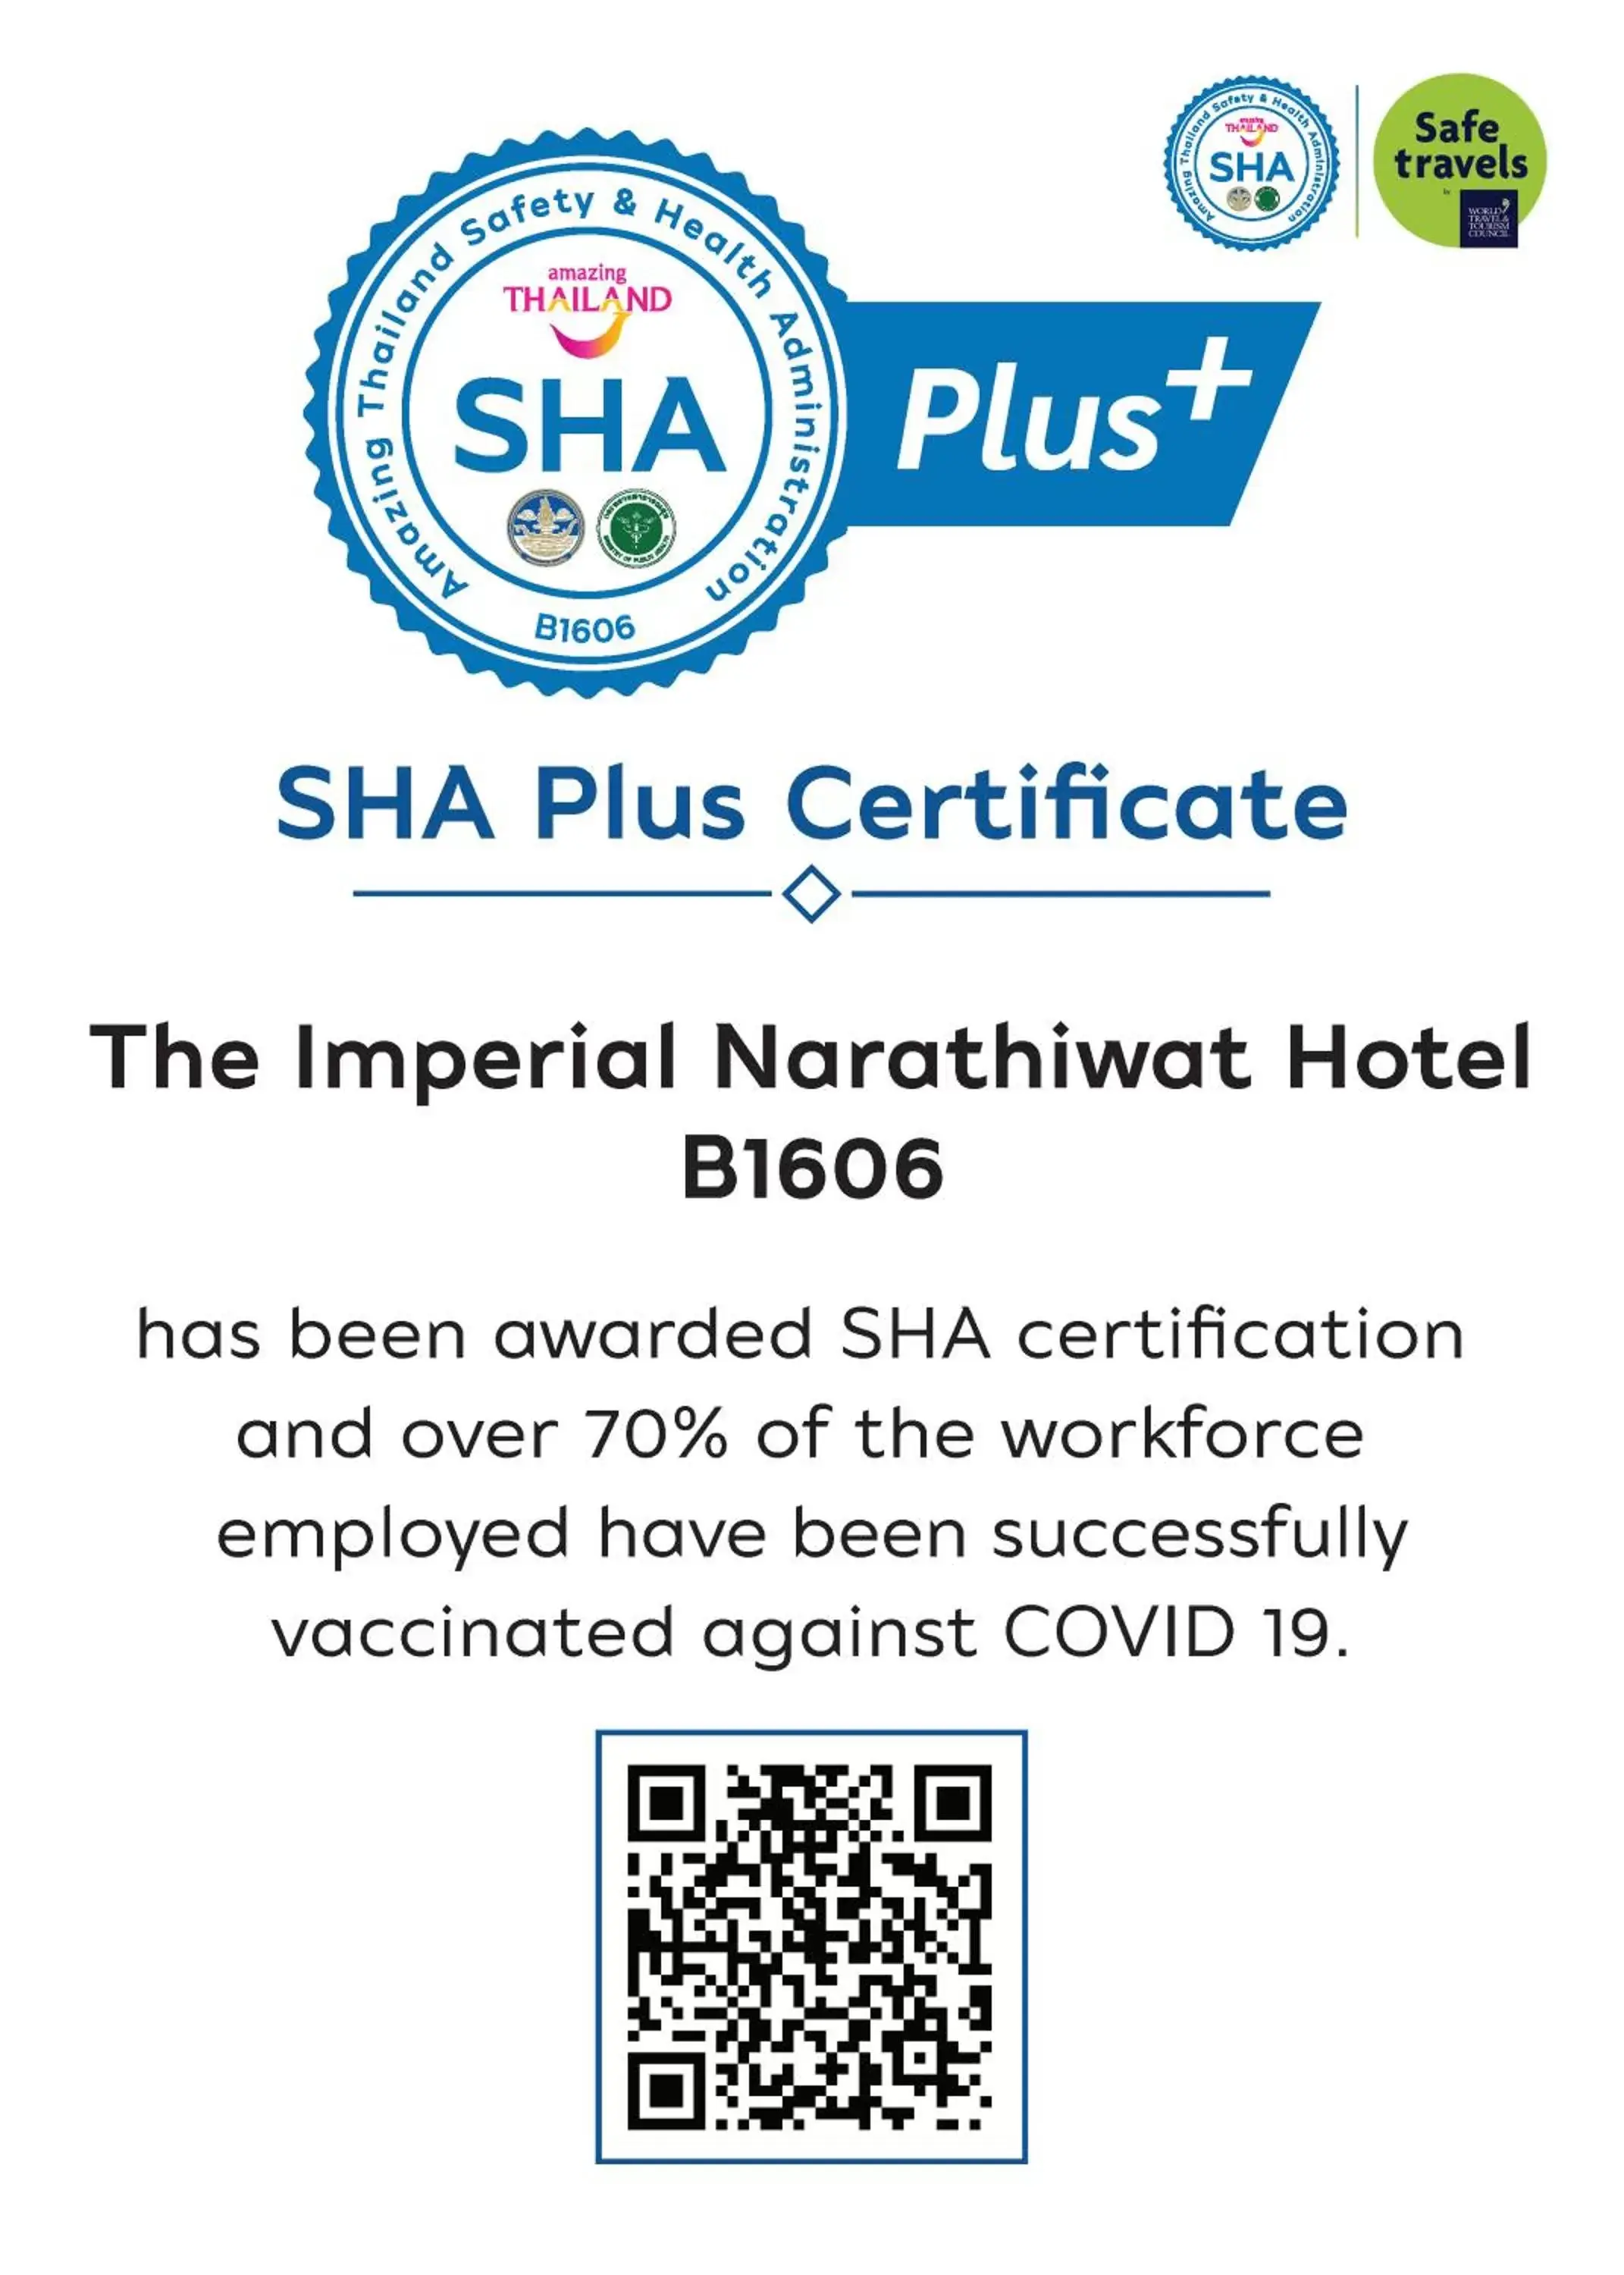 Certificate/Award in The Imperial Narathiwat Hotel